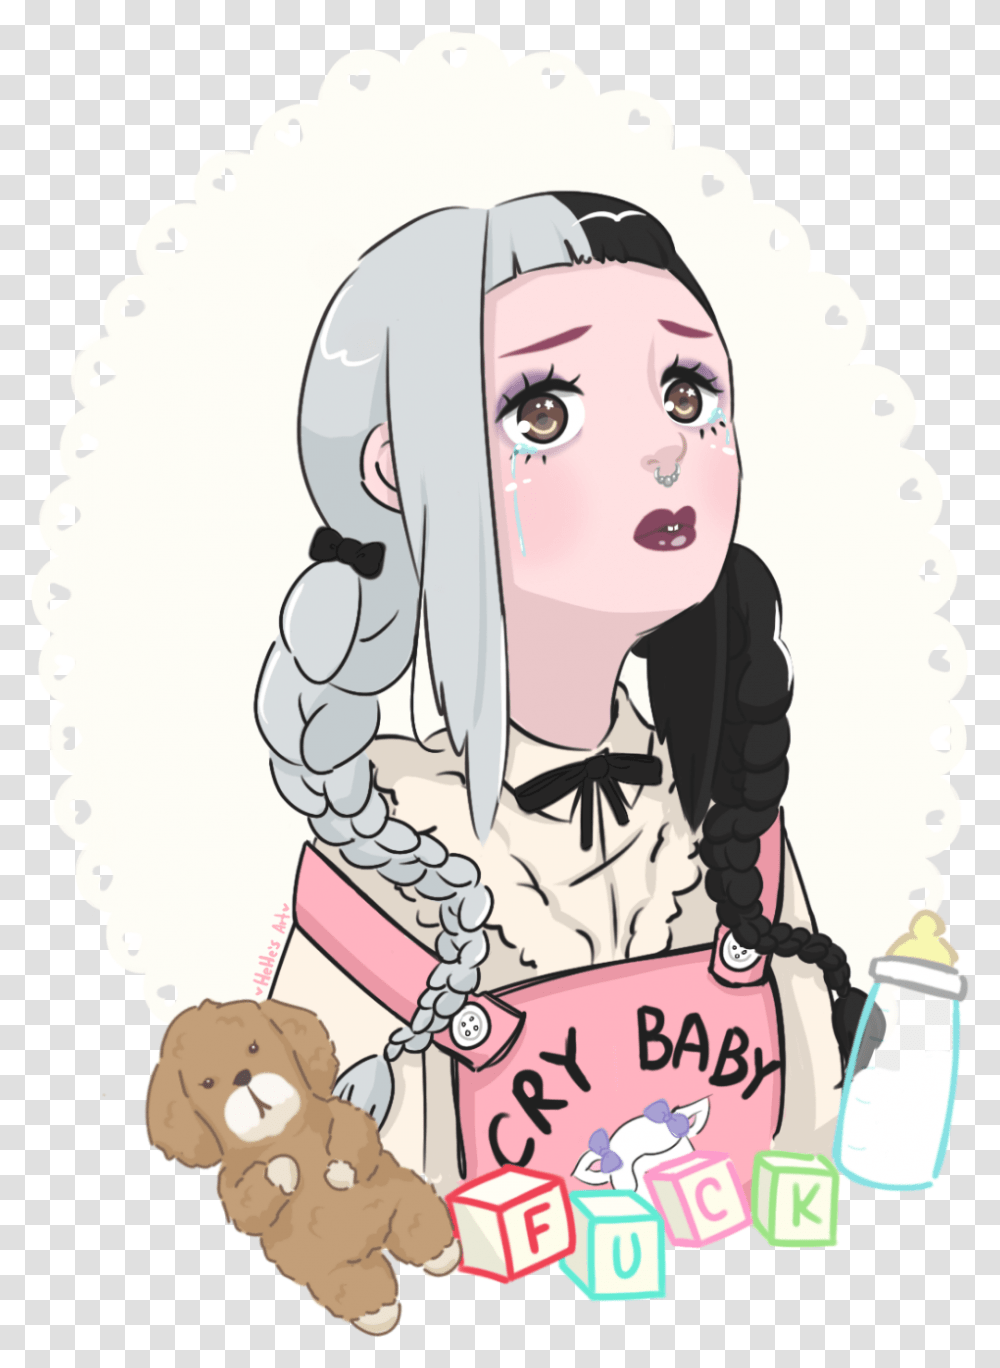 Melanie Martinez Cry Baby Video Melanie Martinez Cry Baby Fanart, Drawing, Snowman, Nature, Doodle Transparent Png